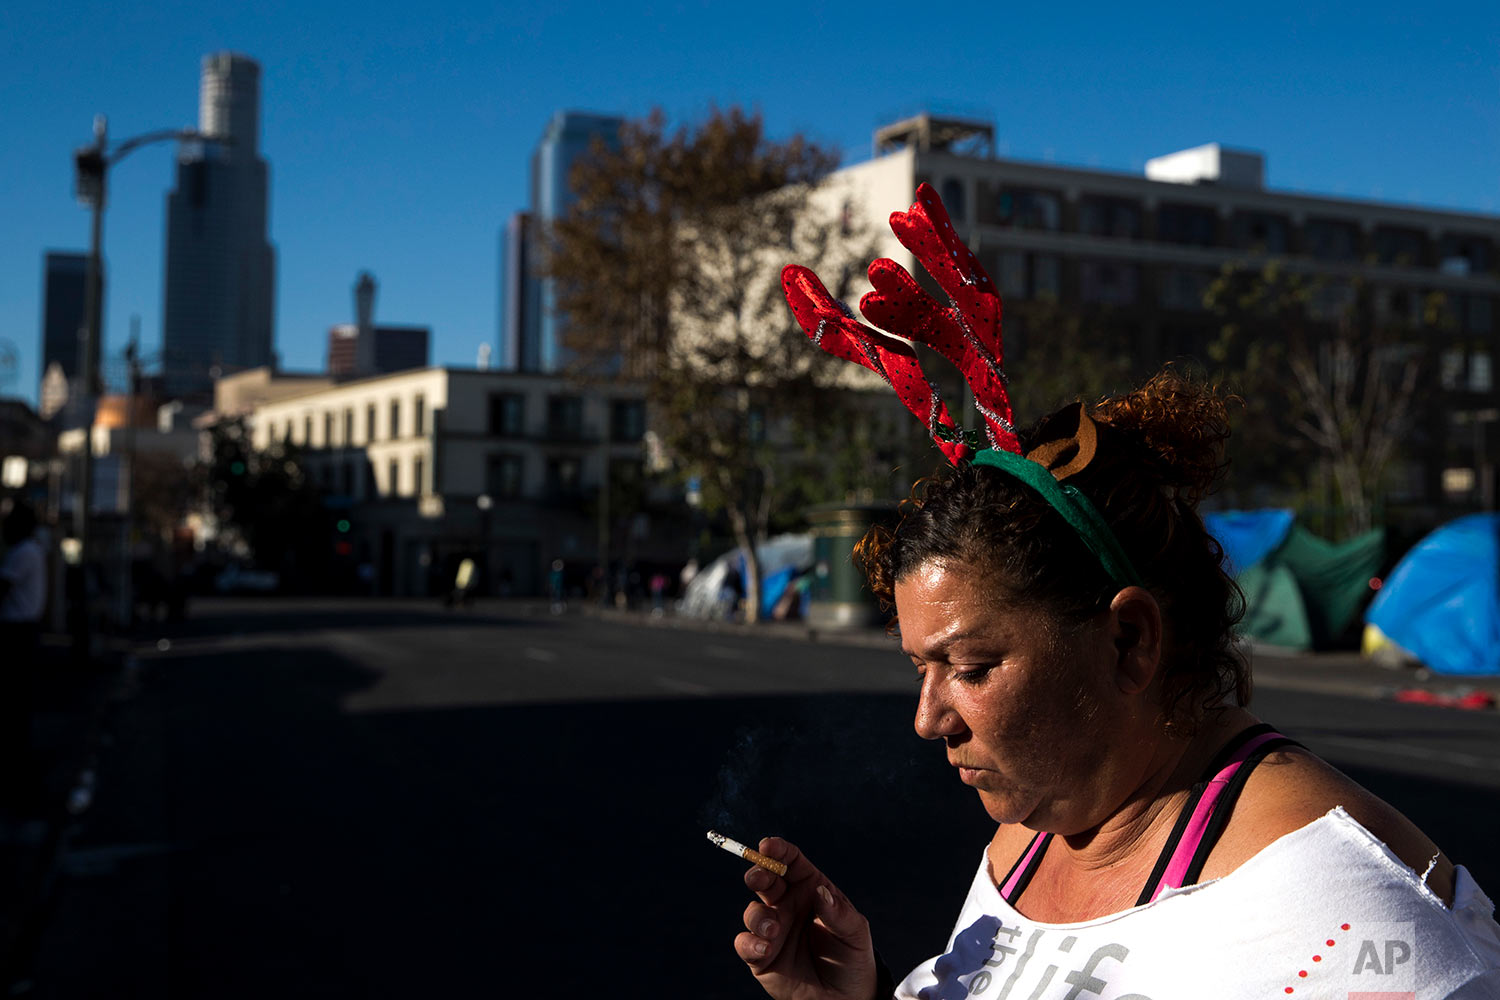  Wearing a Christmas headband, Grace Fernandez, who is homeless, smokes outside her tent in the Skid Row area of downtown Los Angeles, Friday, Dec. 1, 2017. "Holidays are just so much special. It should bring us altogether as one even if we are homel